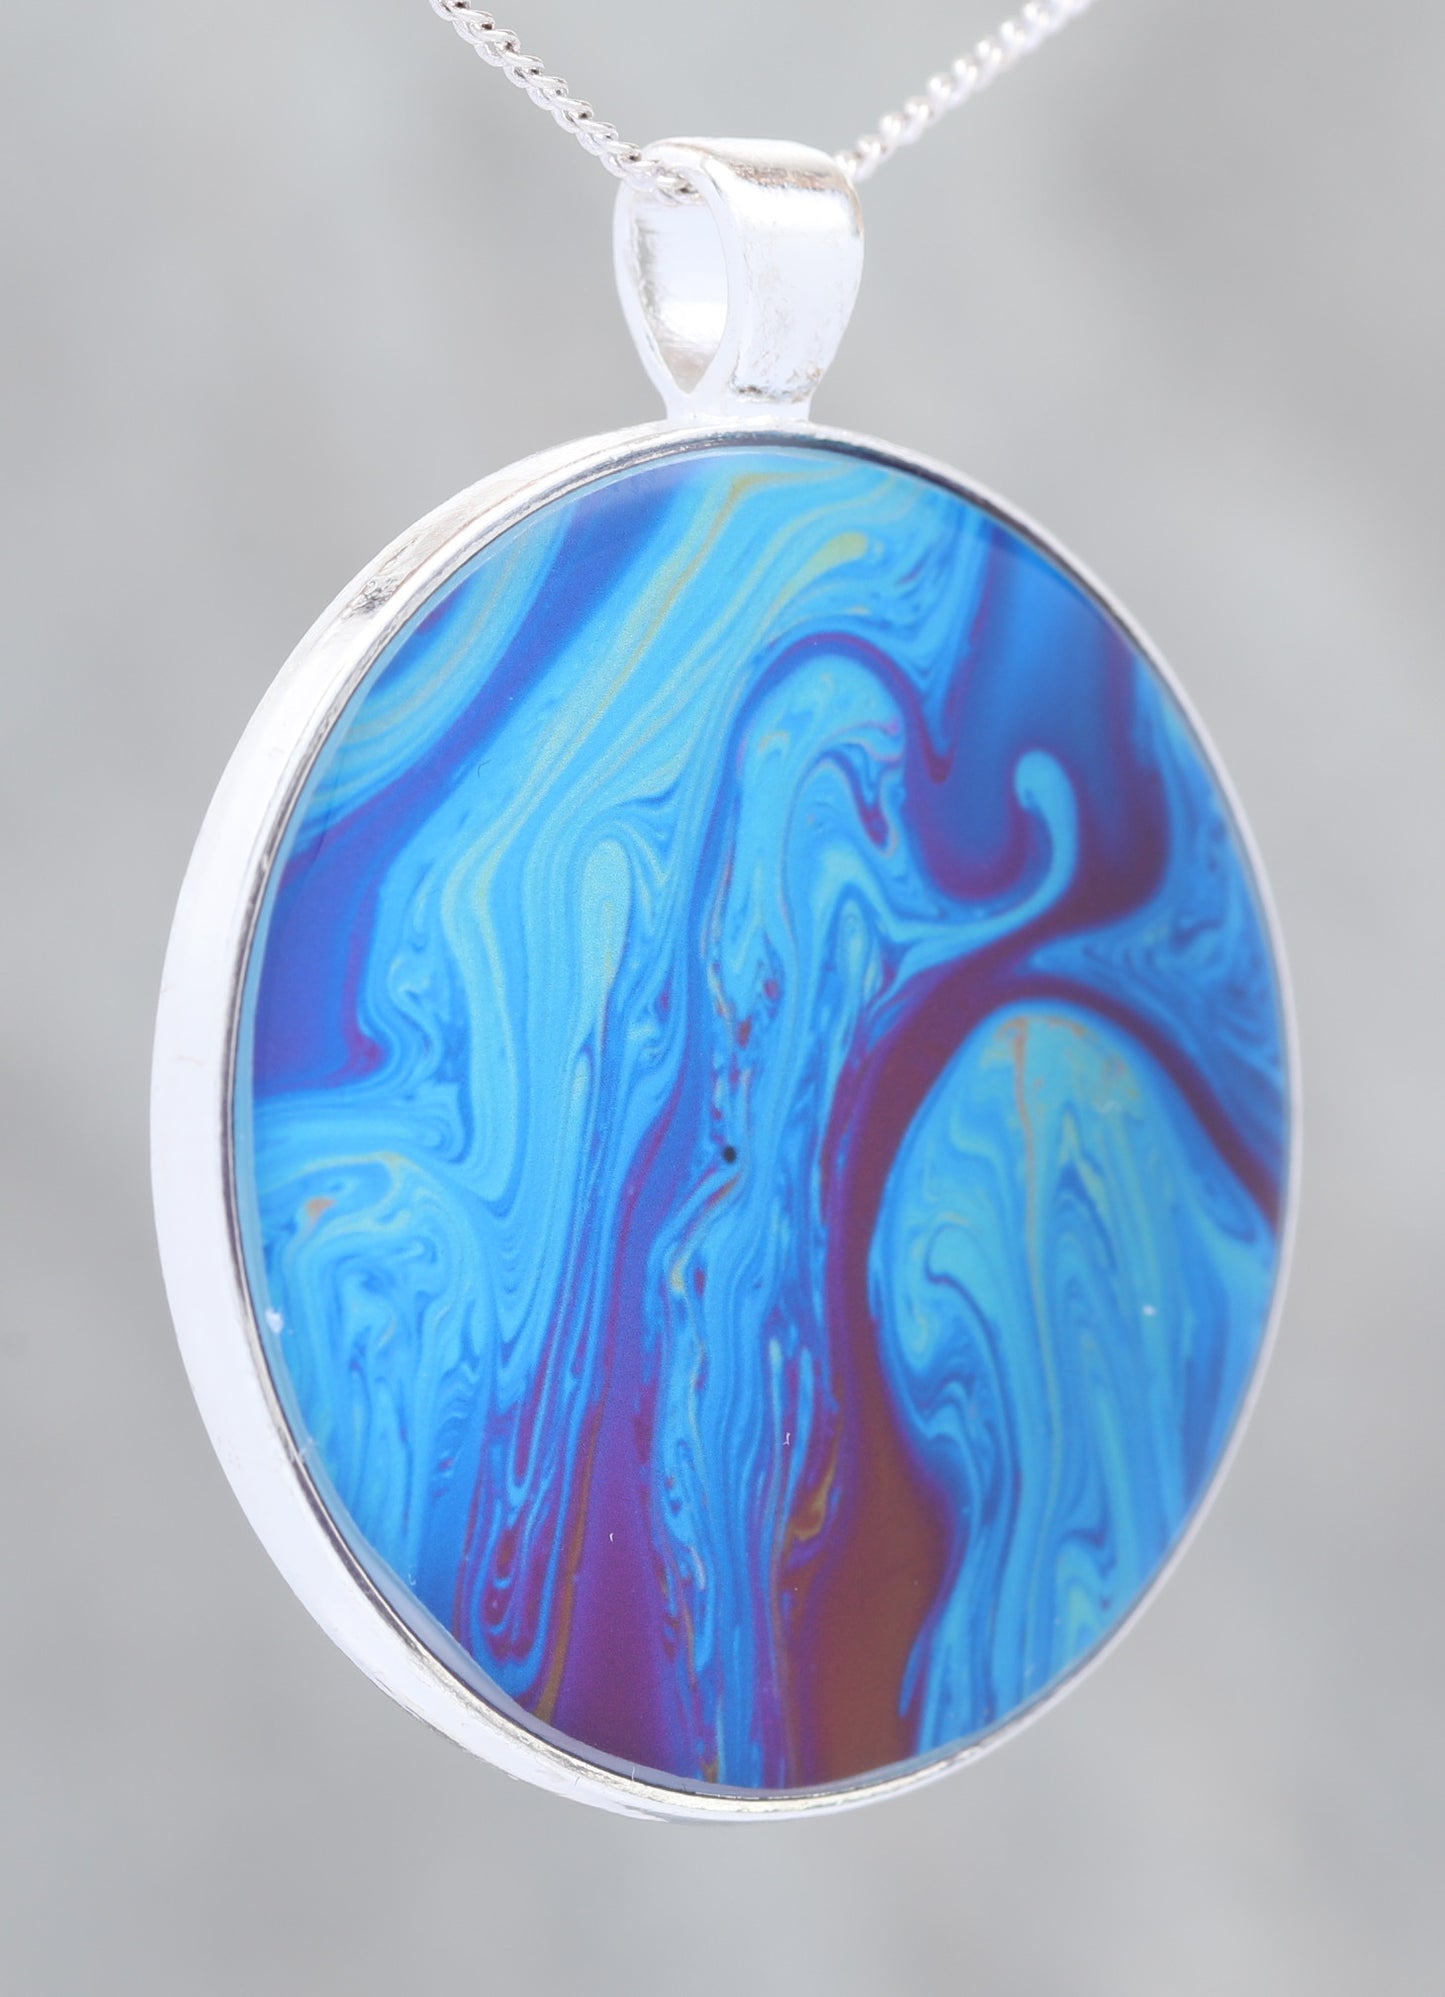 Blue Rage  - Glow-in-the-dark pendant with a beautiful abstract soap film pattern